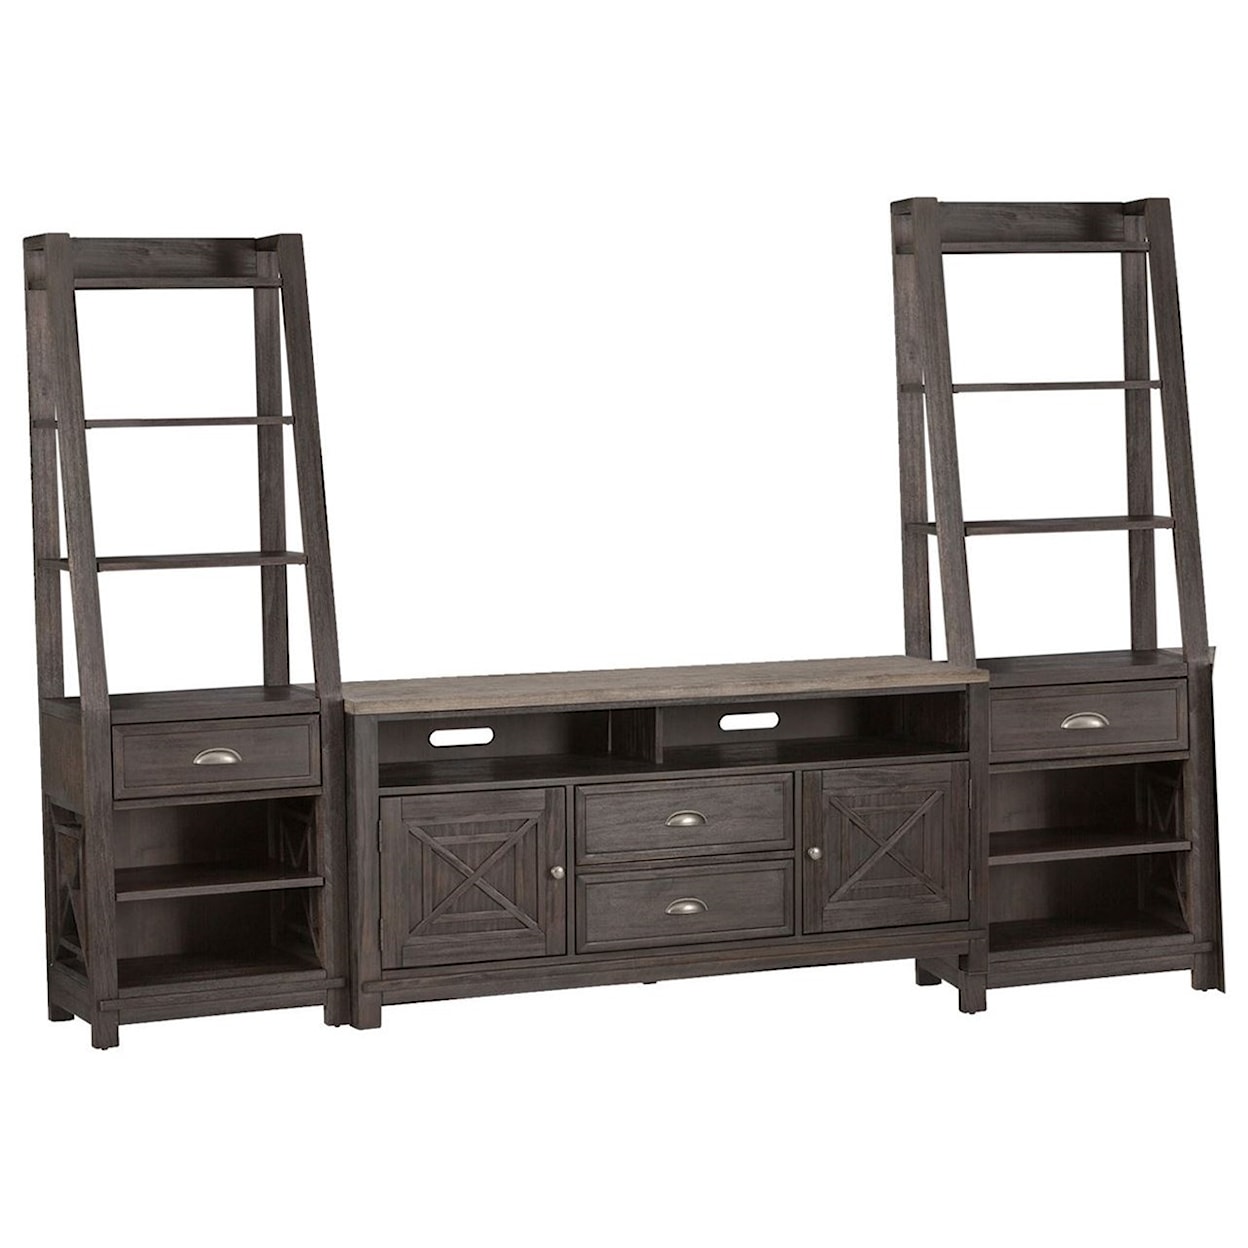 Liberty Furniture Heatherbrook Entertainment Center with Piers